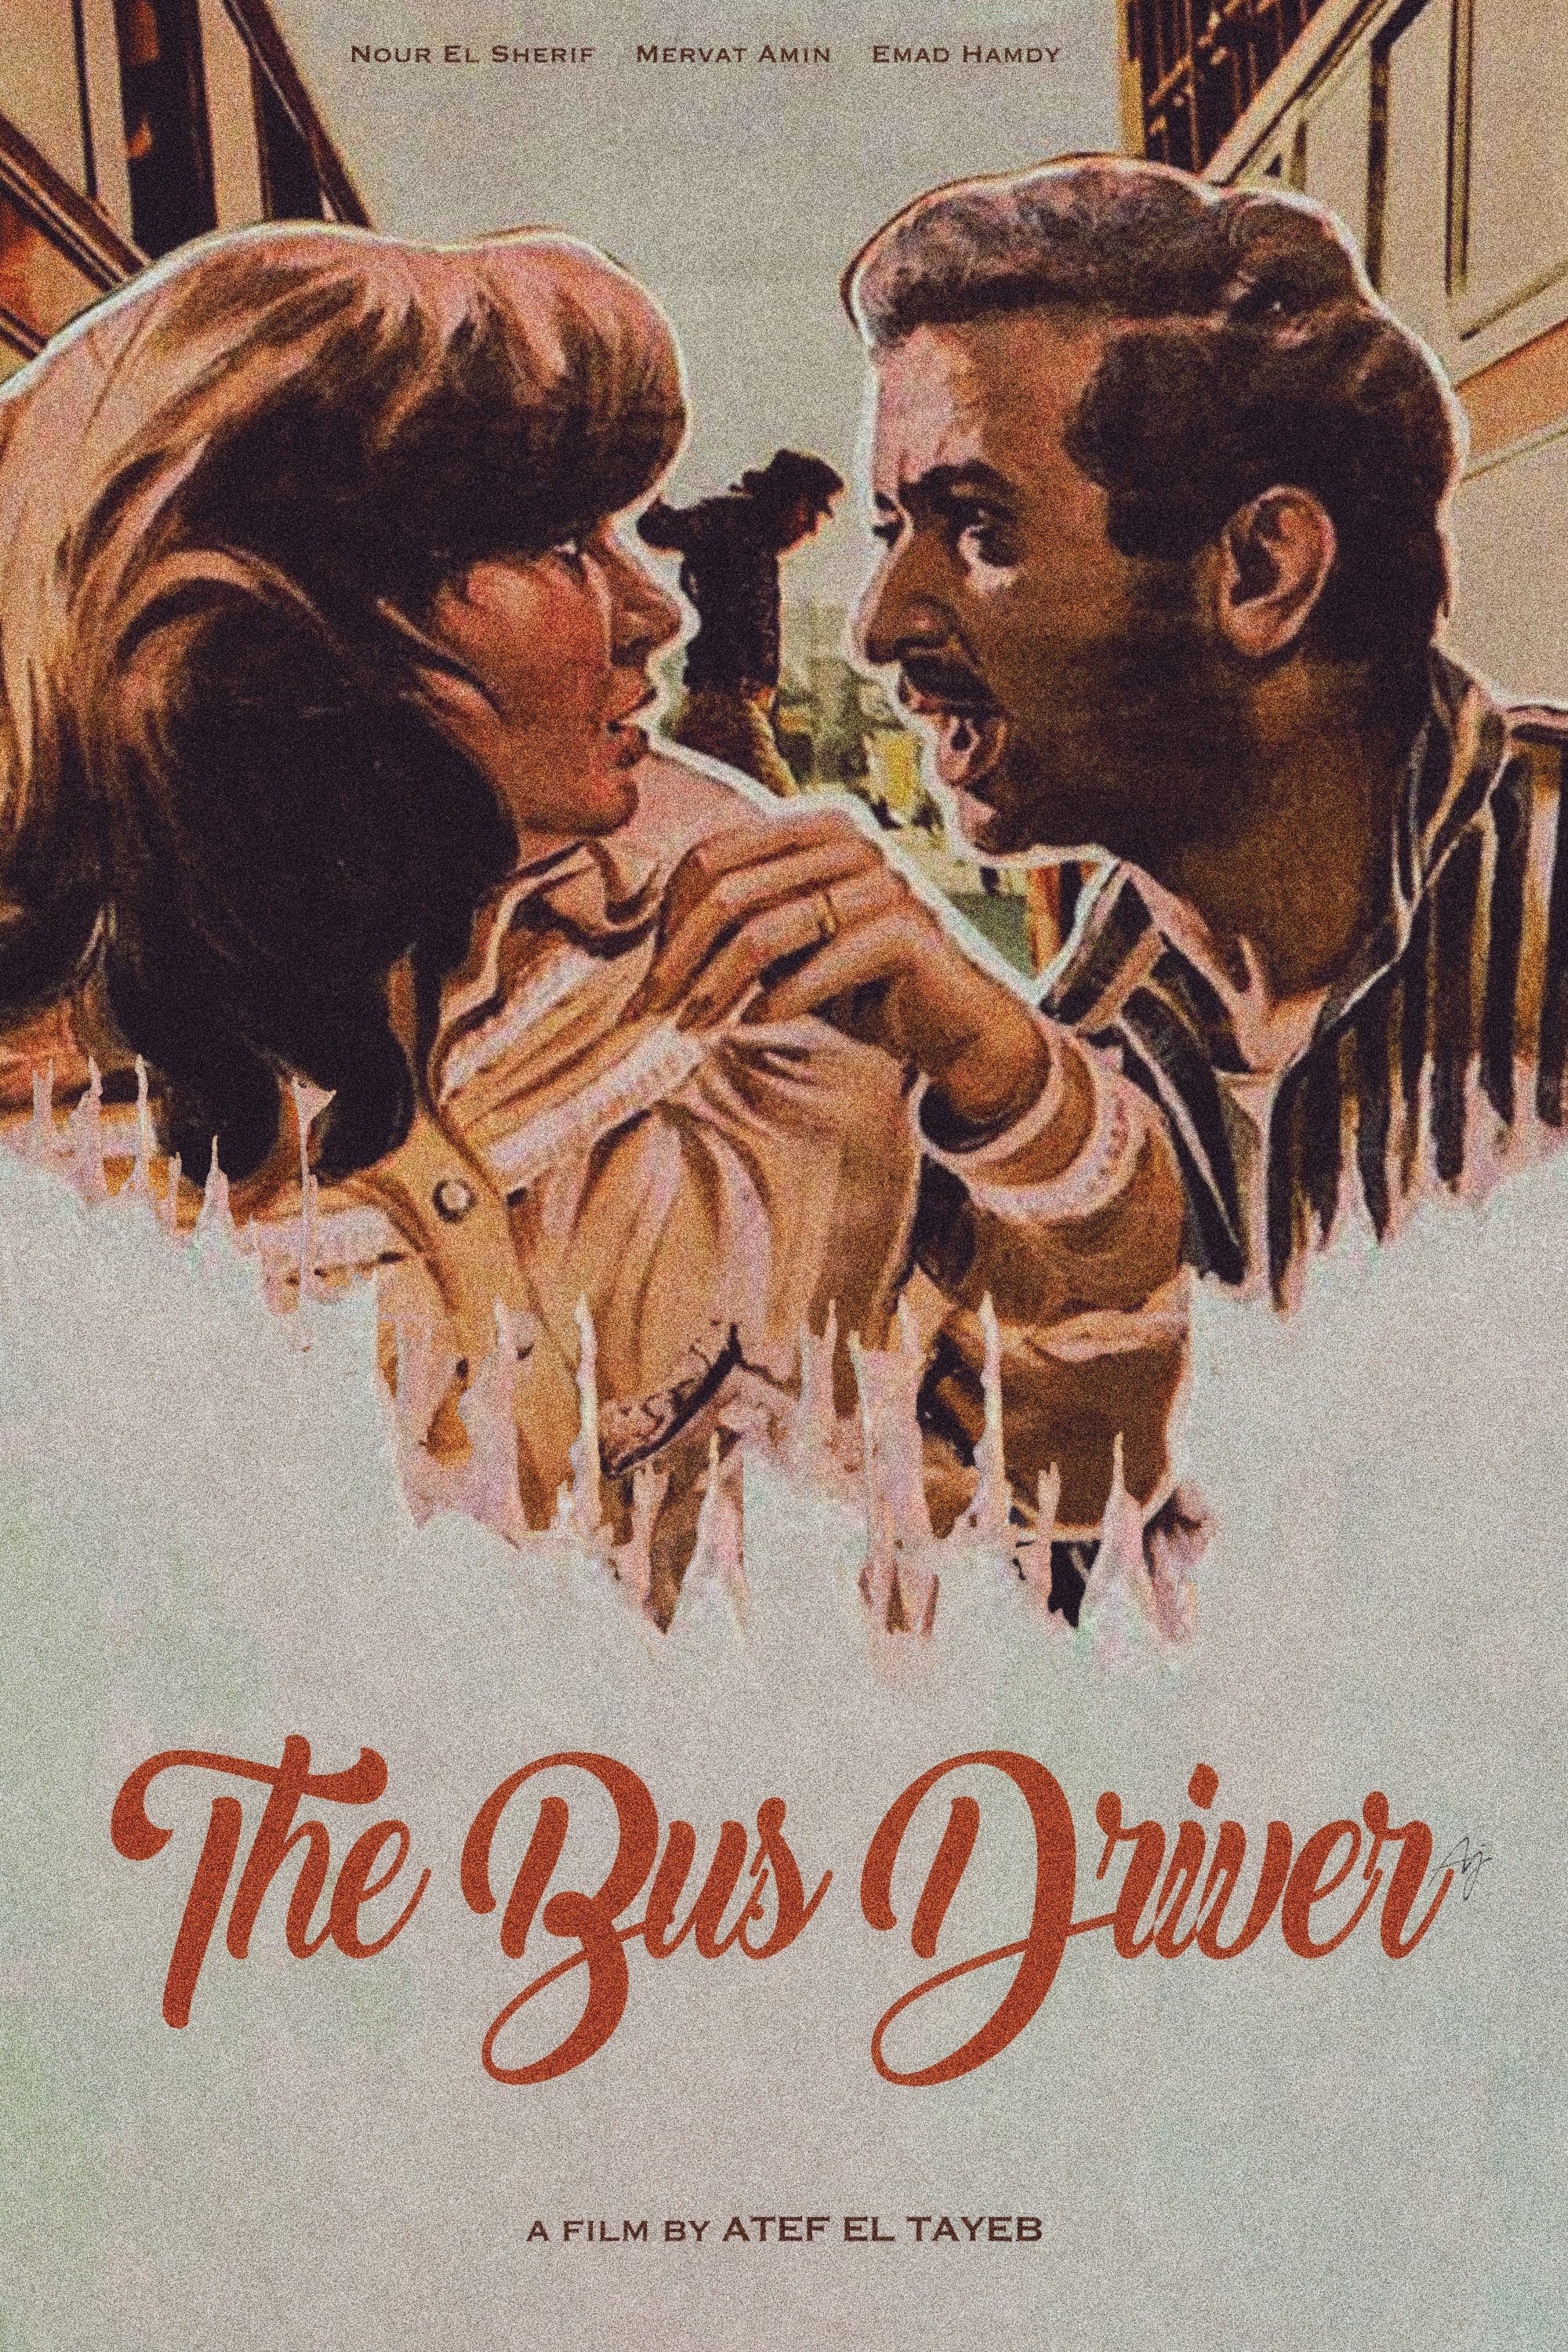 The Bus Driver (1982)